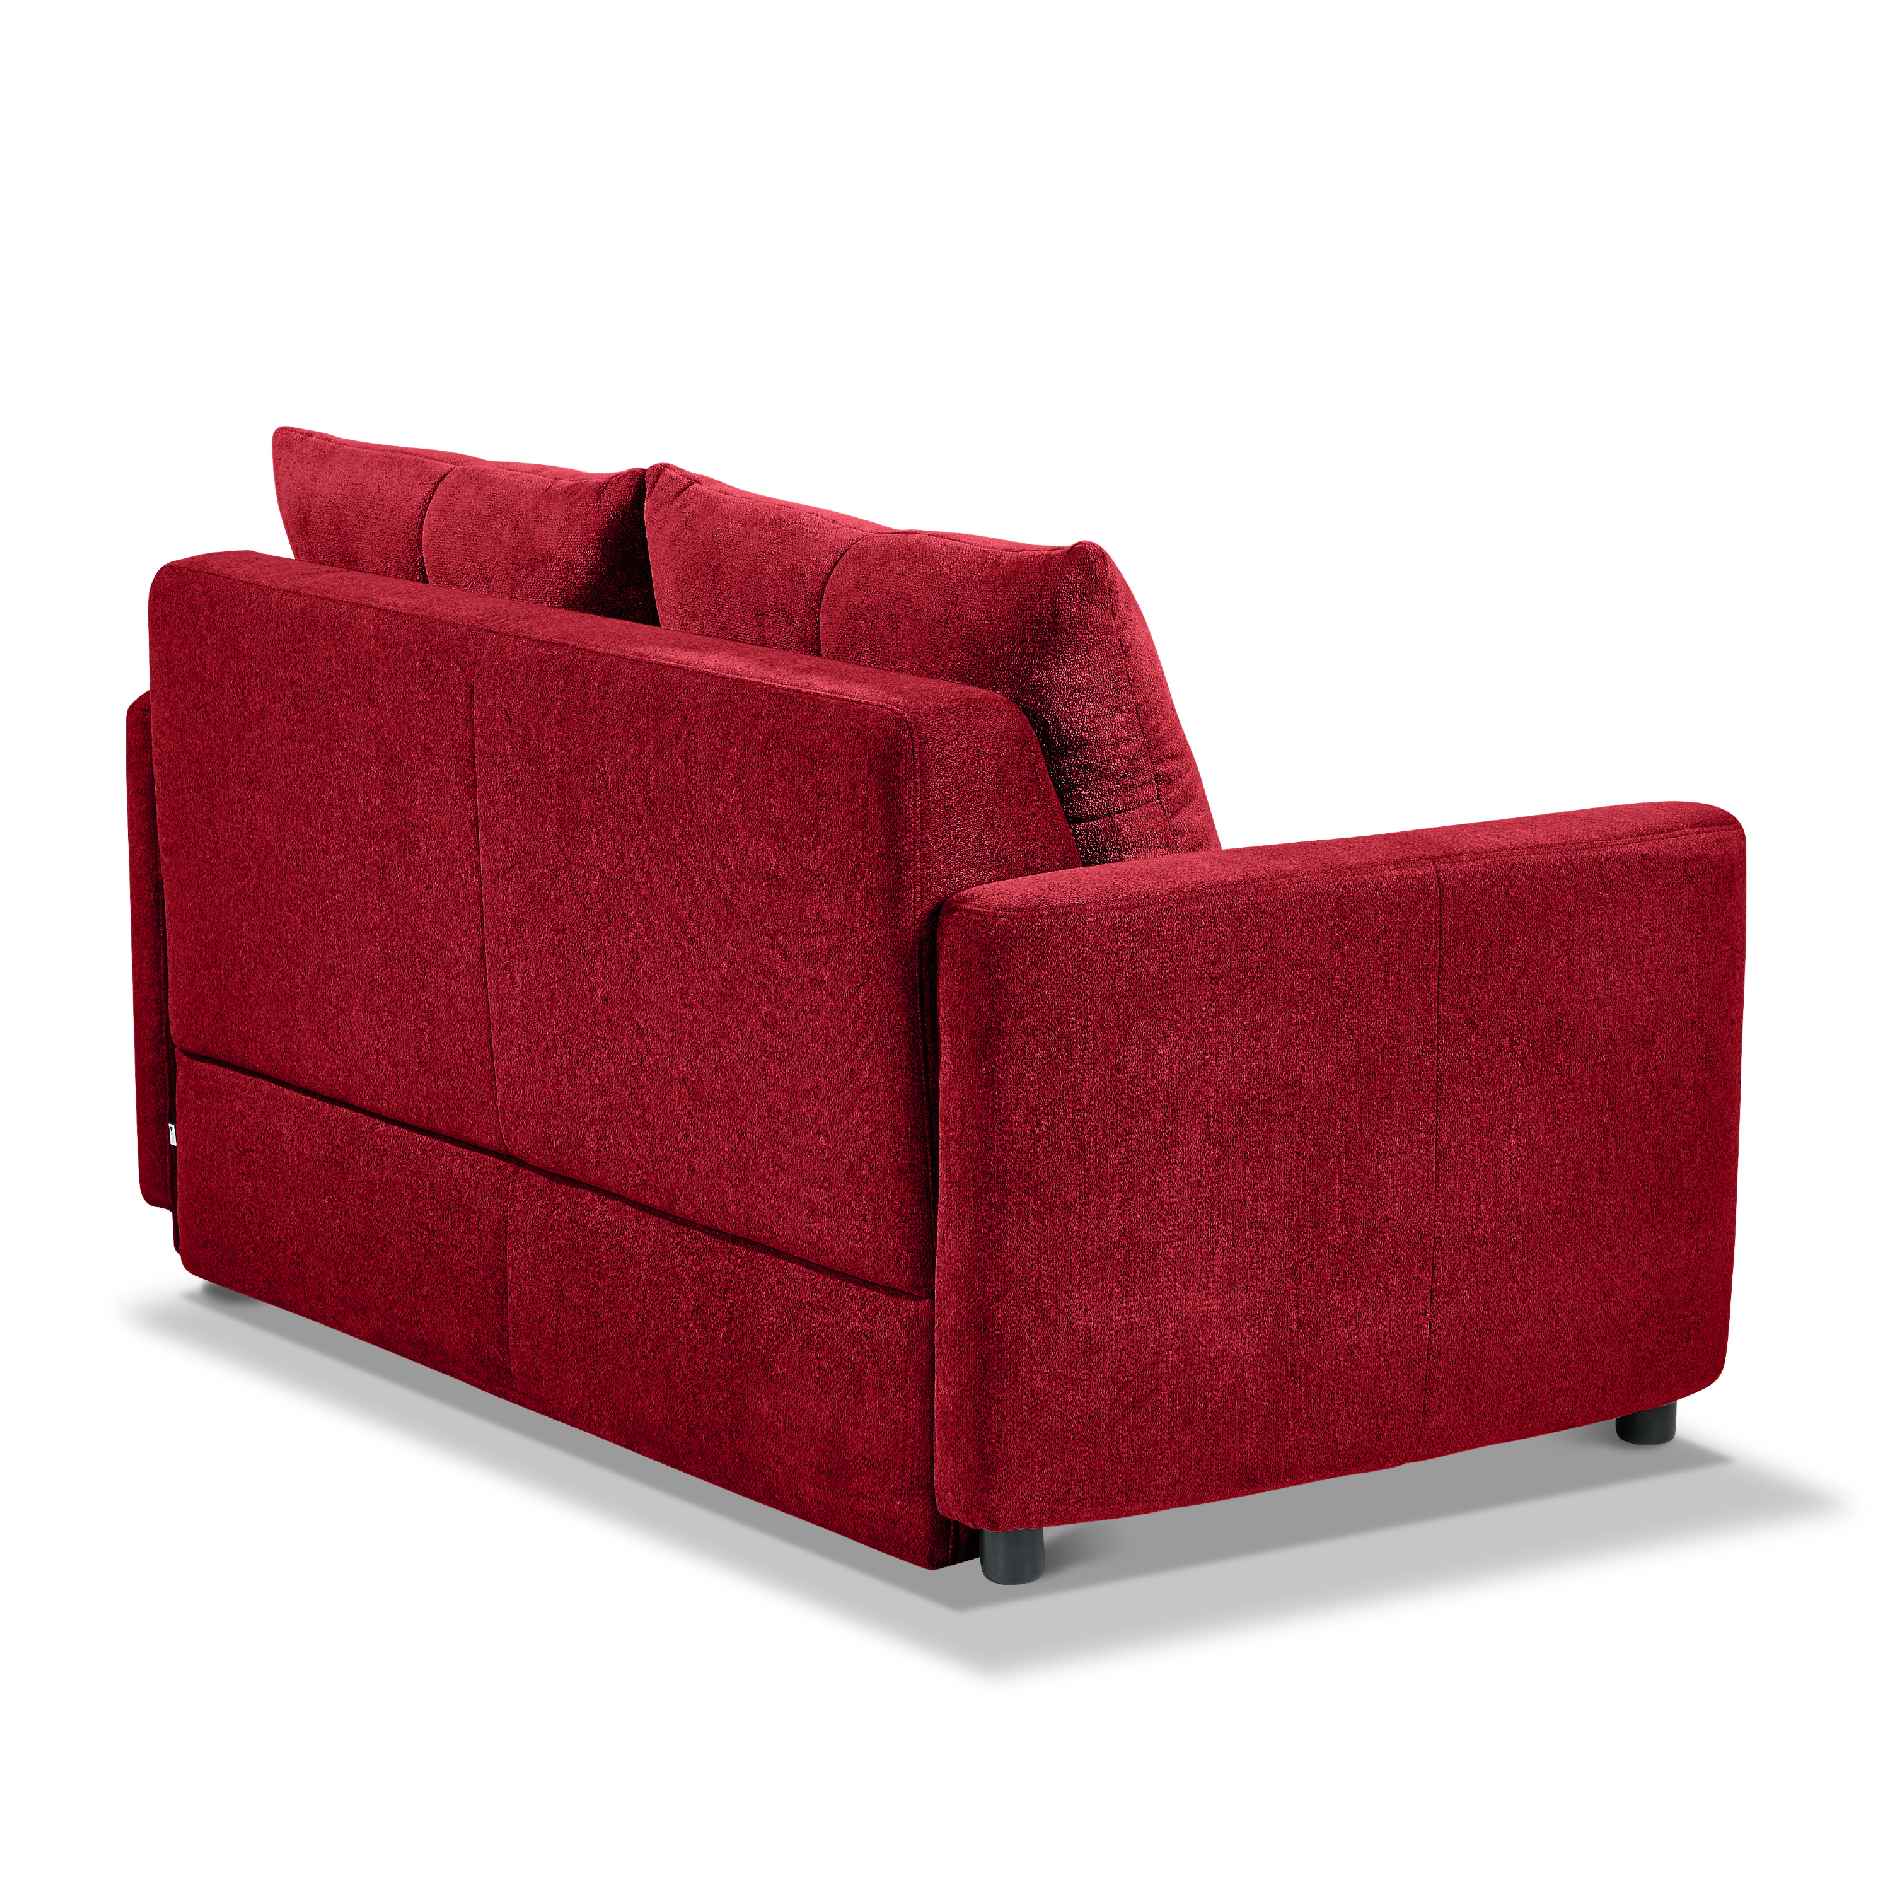 set one by Musterring SO 4200 Sofa Bezug bordeaux – Rückenansicht